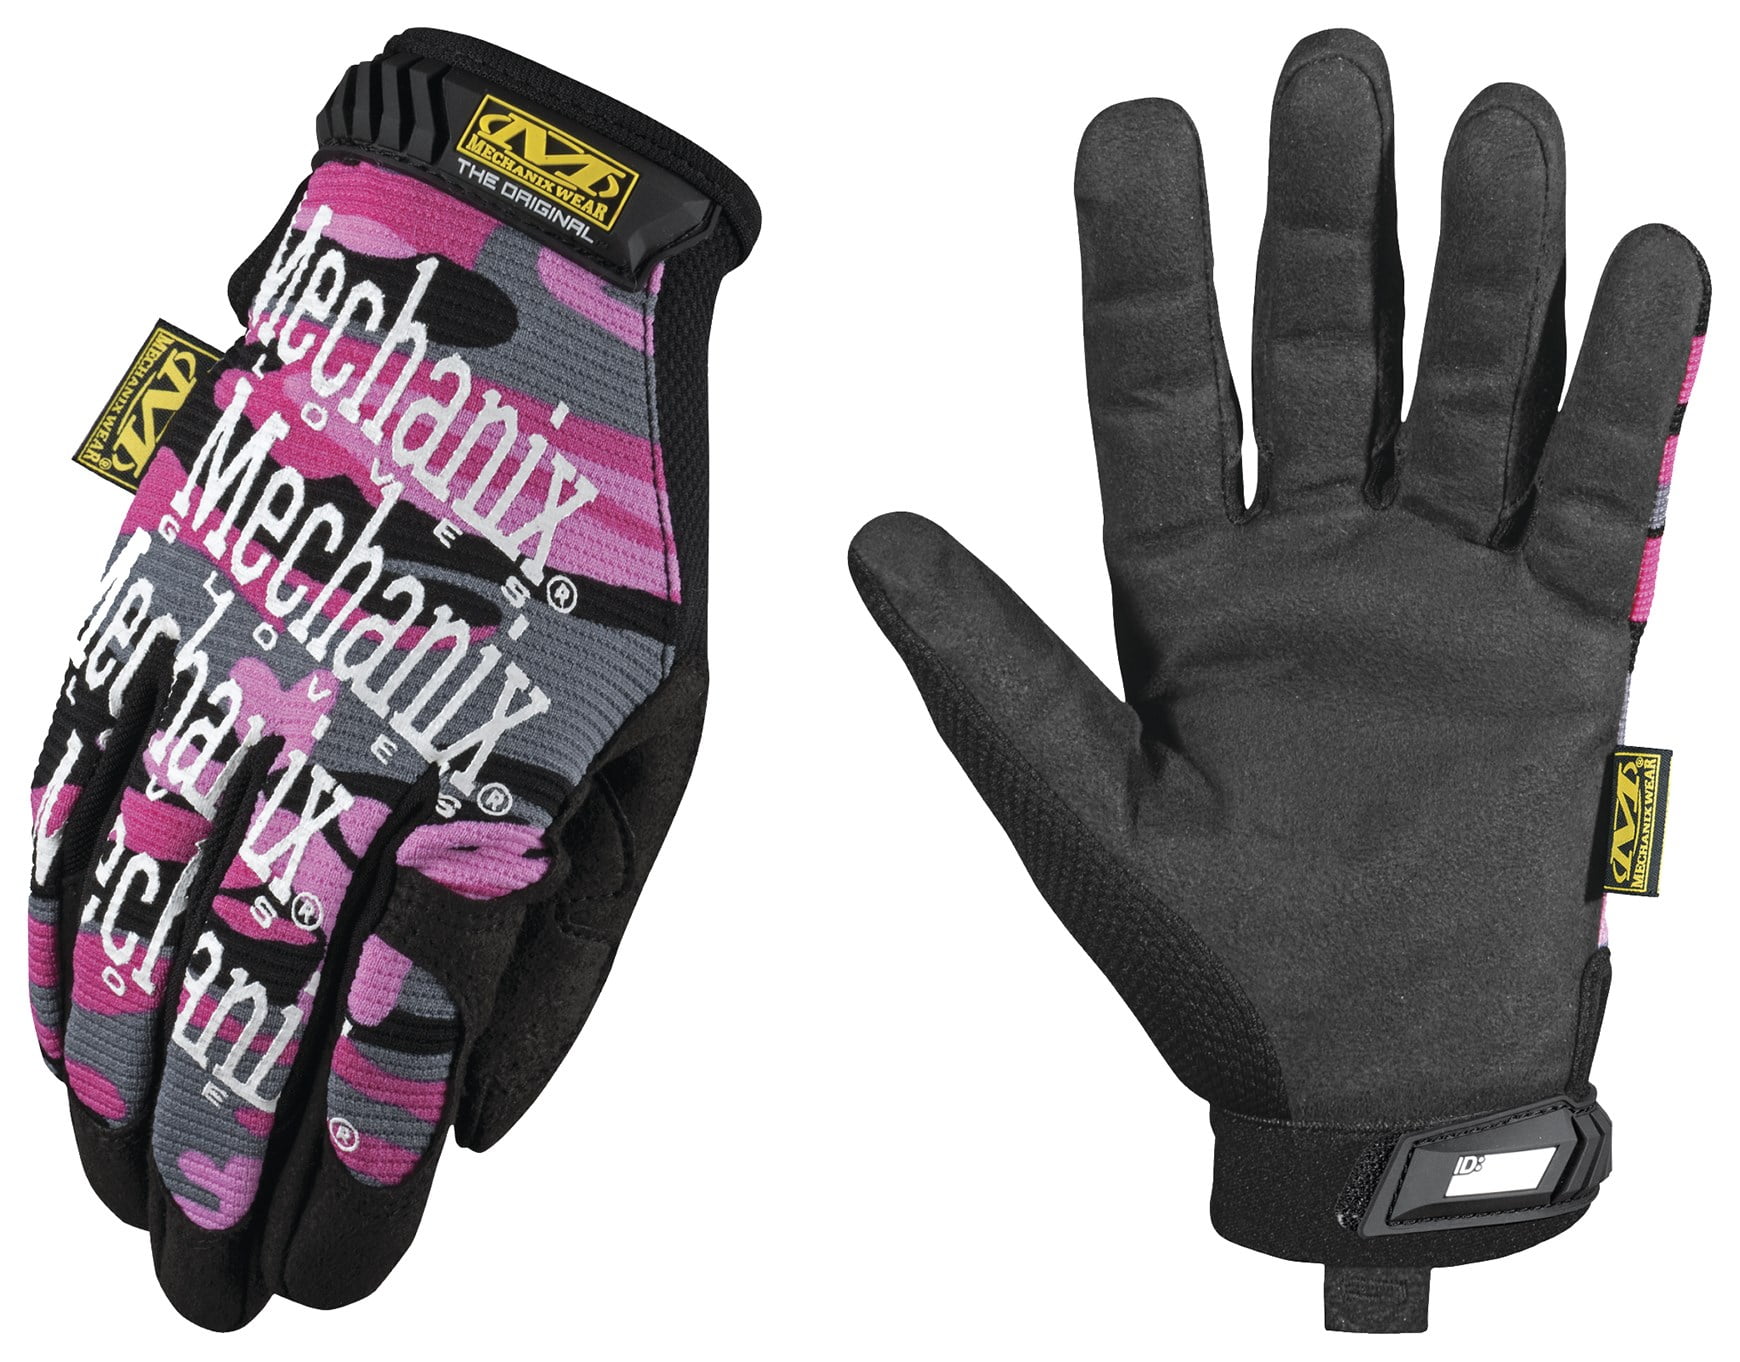 MECHANIX WEAR WOMENS LADIES PADDED PALM GARDENING GLOVES LARGE PINK NEW TAGS 